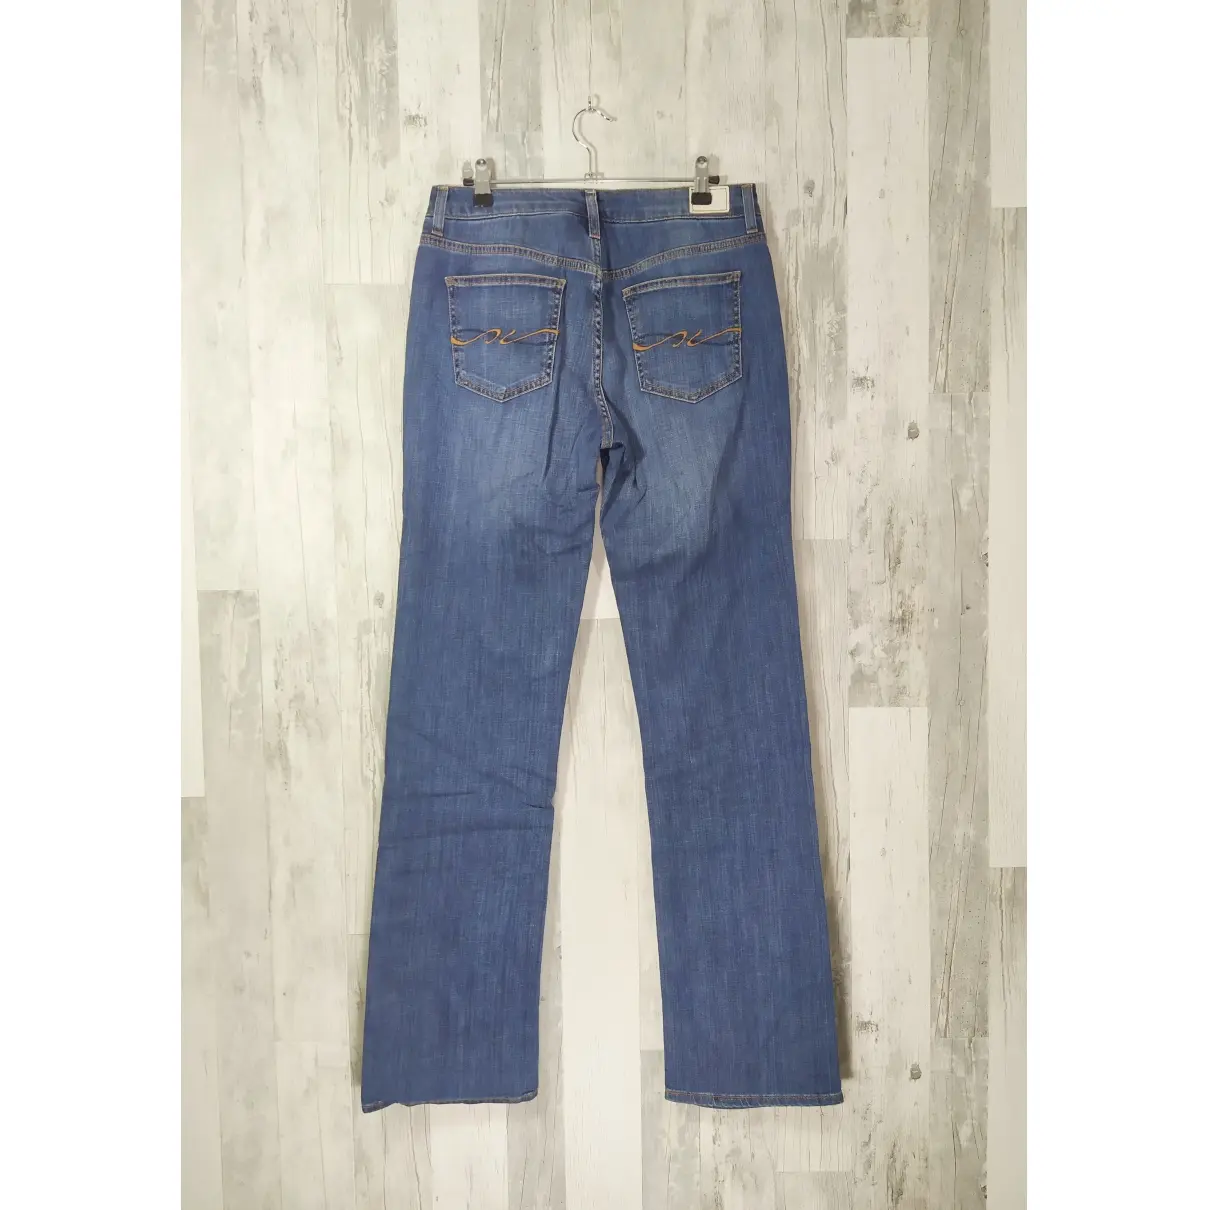 Tommy Hilfiger Straight jeans for sale